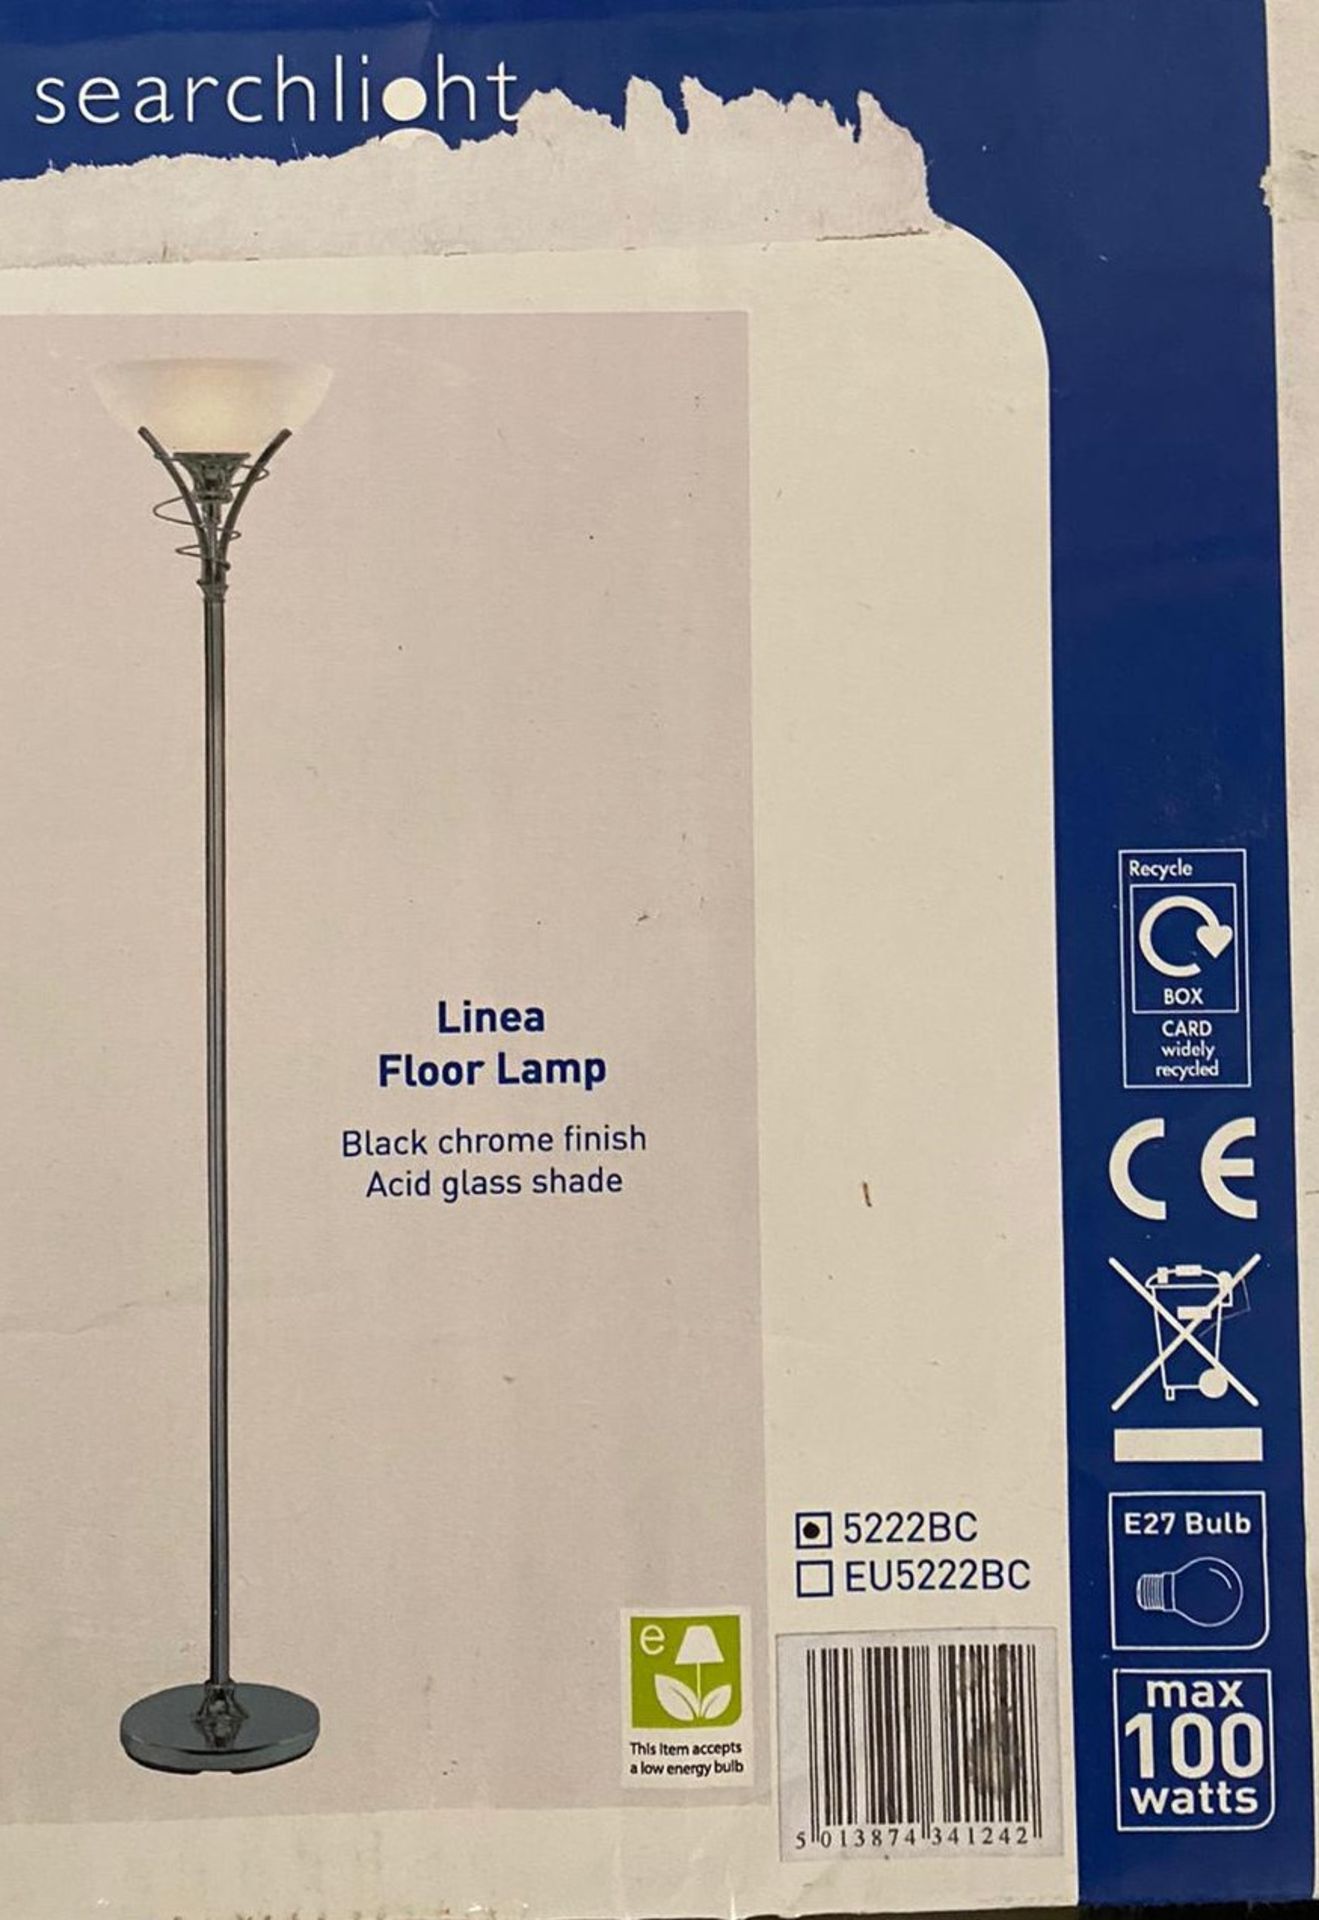 1 x Searchlight Linea Floor Lamp in black chrome - Ref: 5222BC - New and Boxed - RRP: £100.00